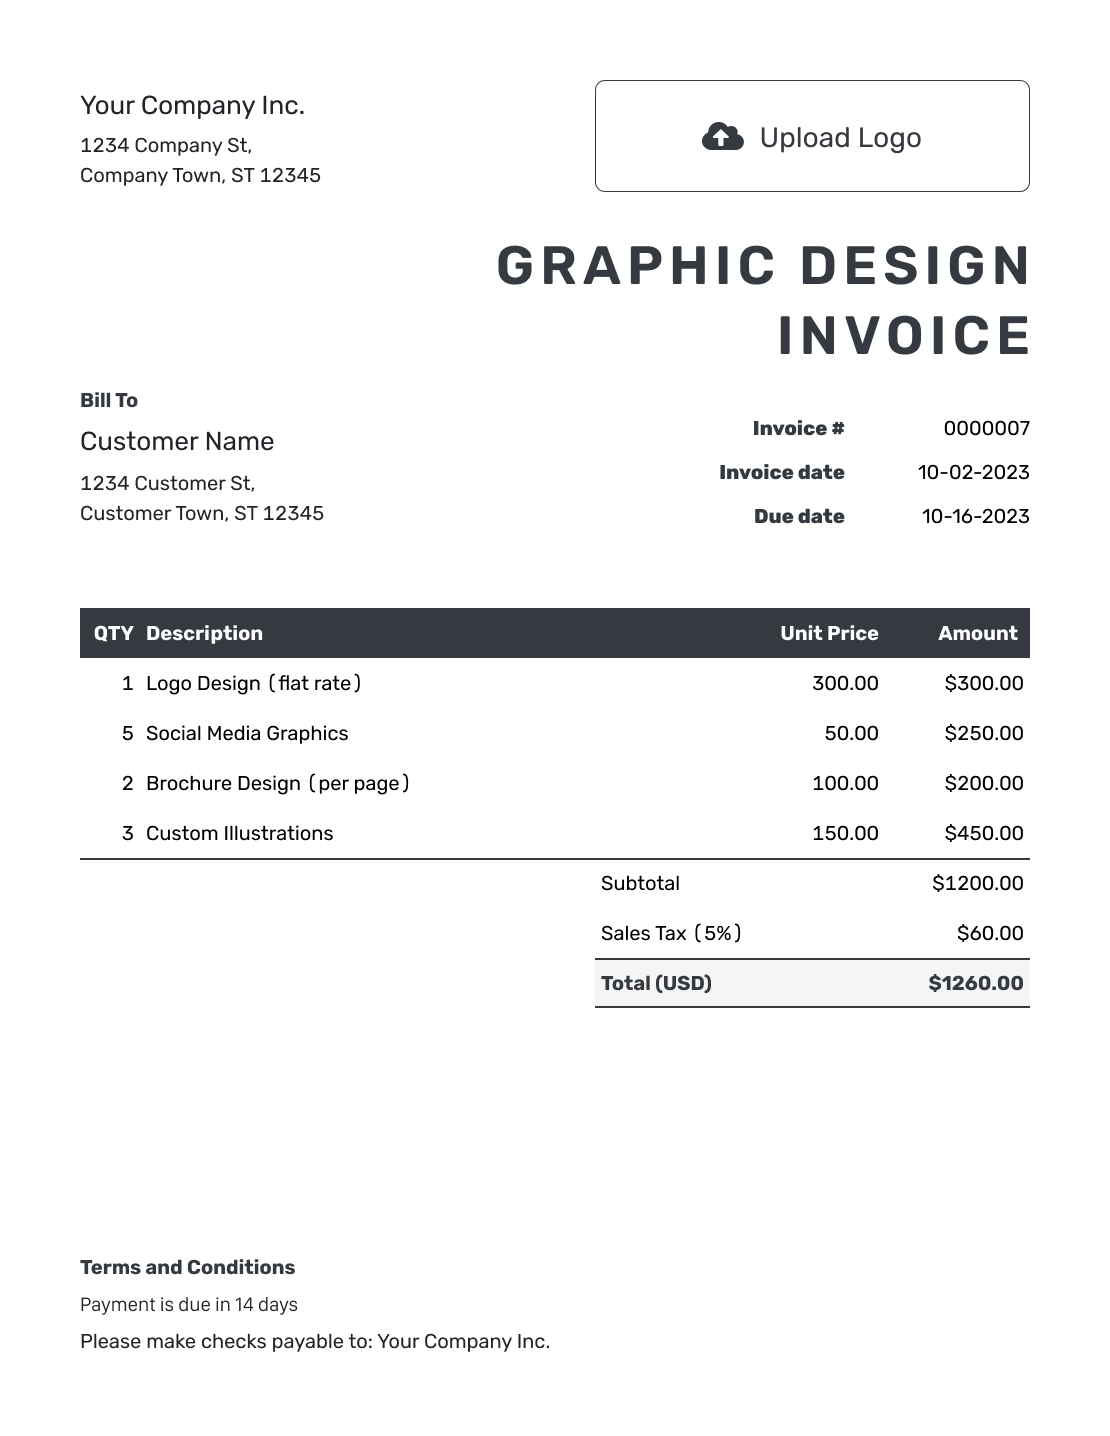 Hourly Graphic Design Invoice Template